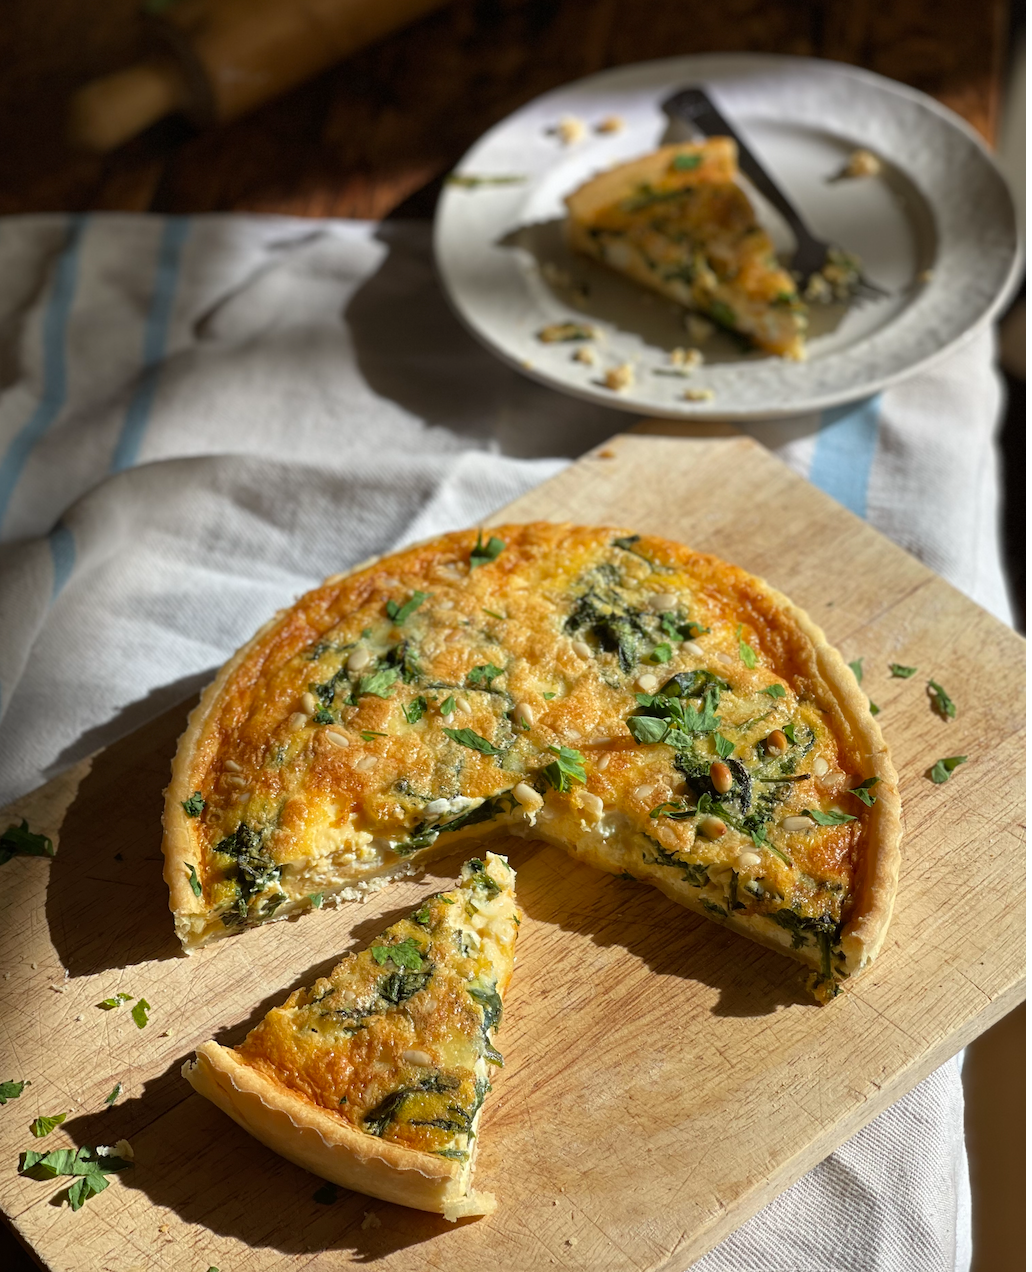 Spinach & Feta Quiche with pine nuts